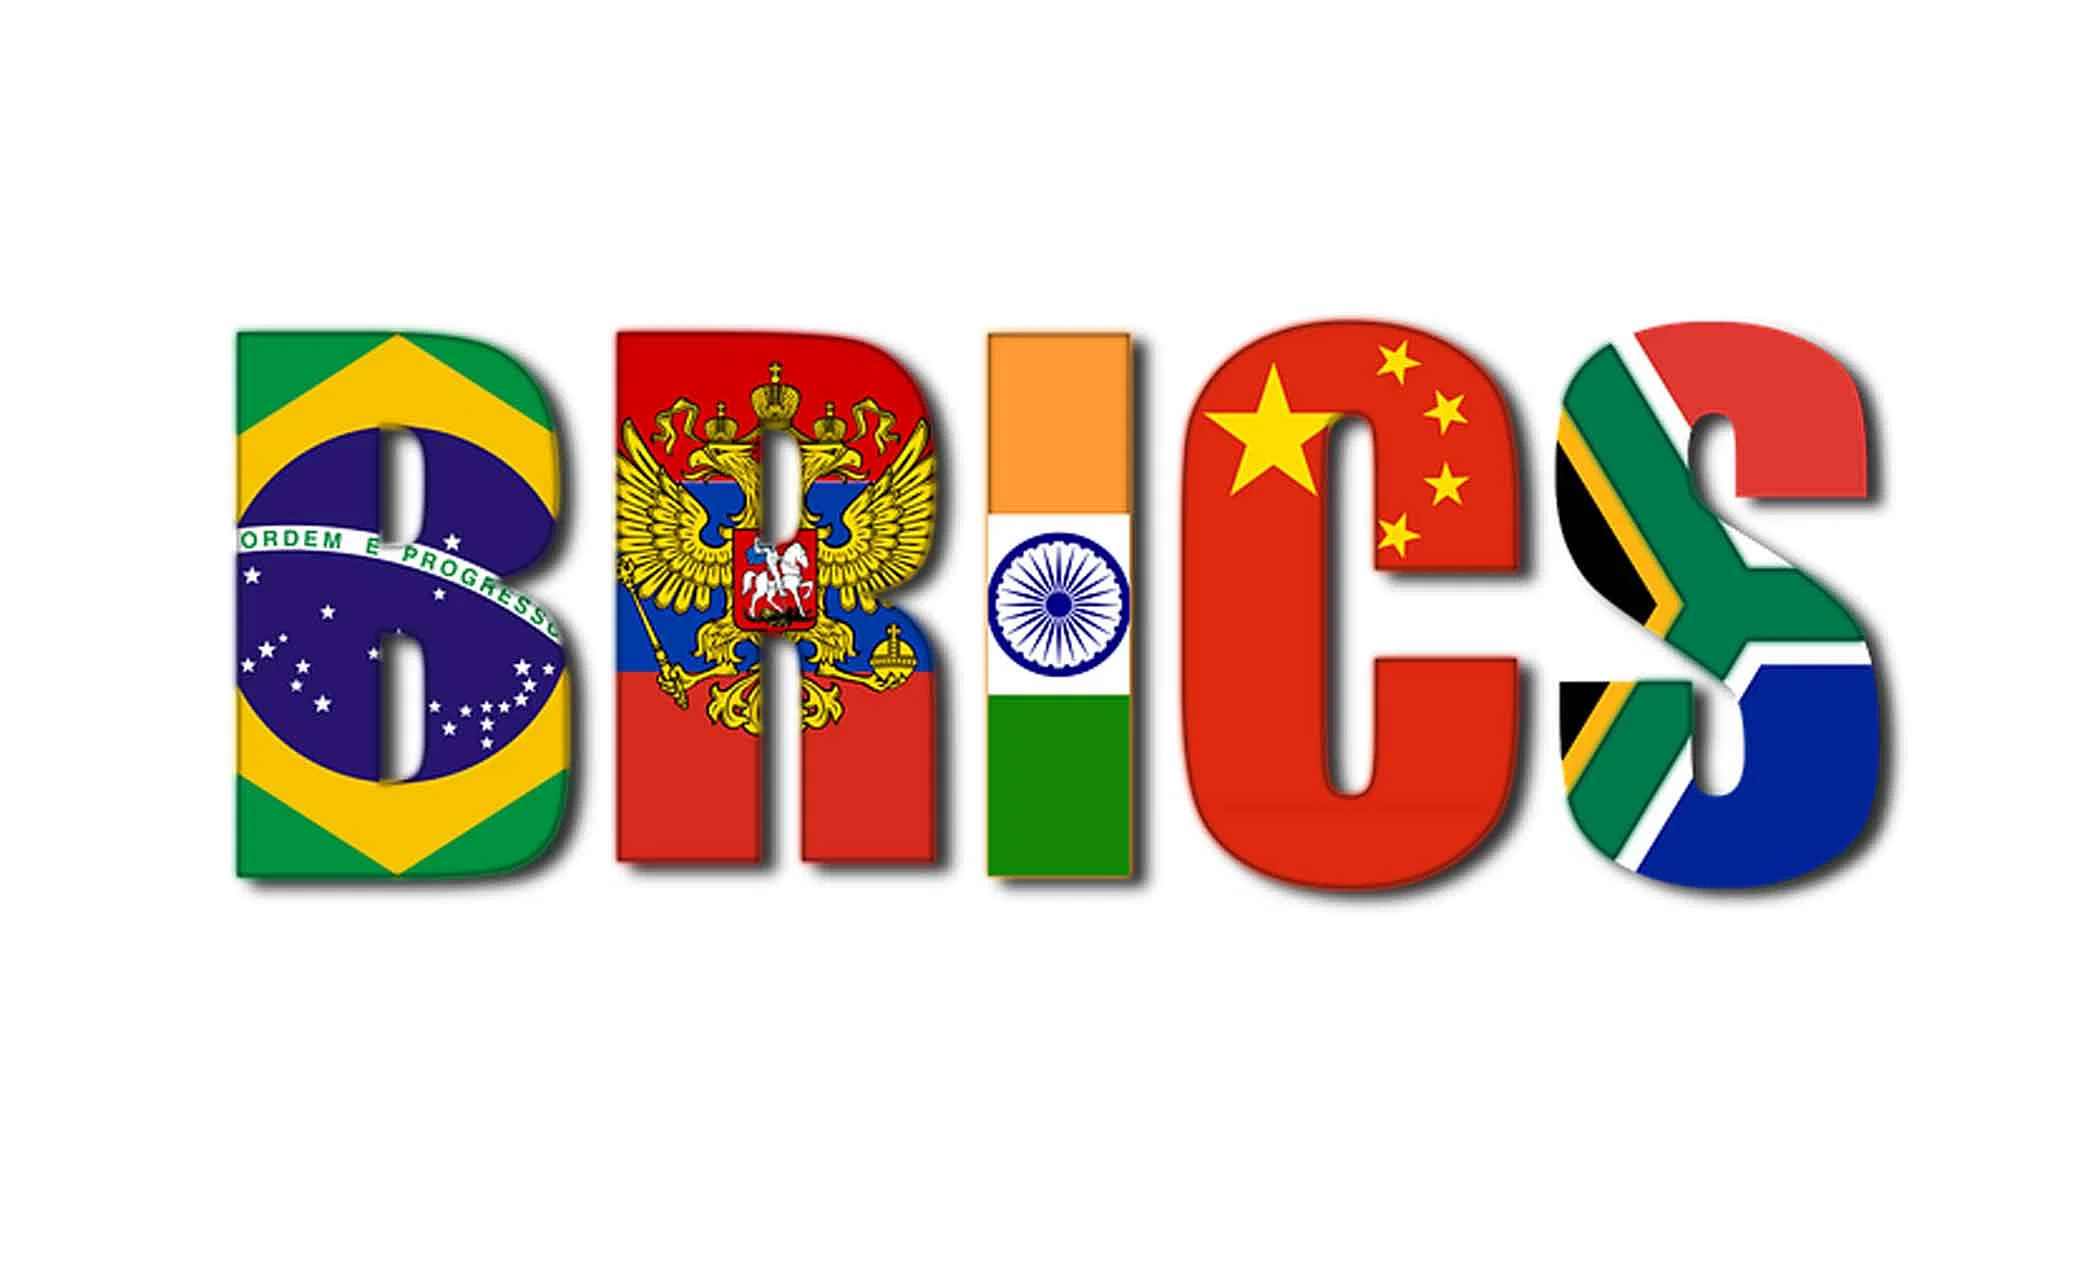 BRICS: meaning, history, criticism and more - MakeMoney.ng